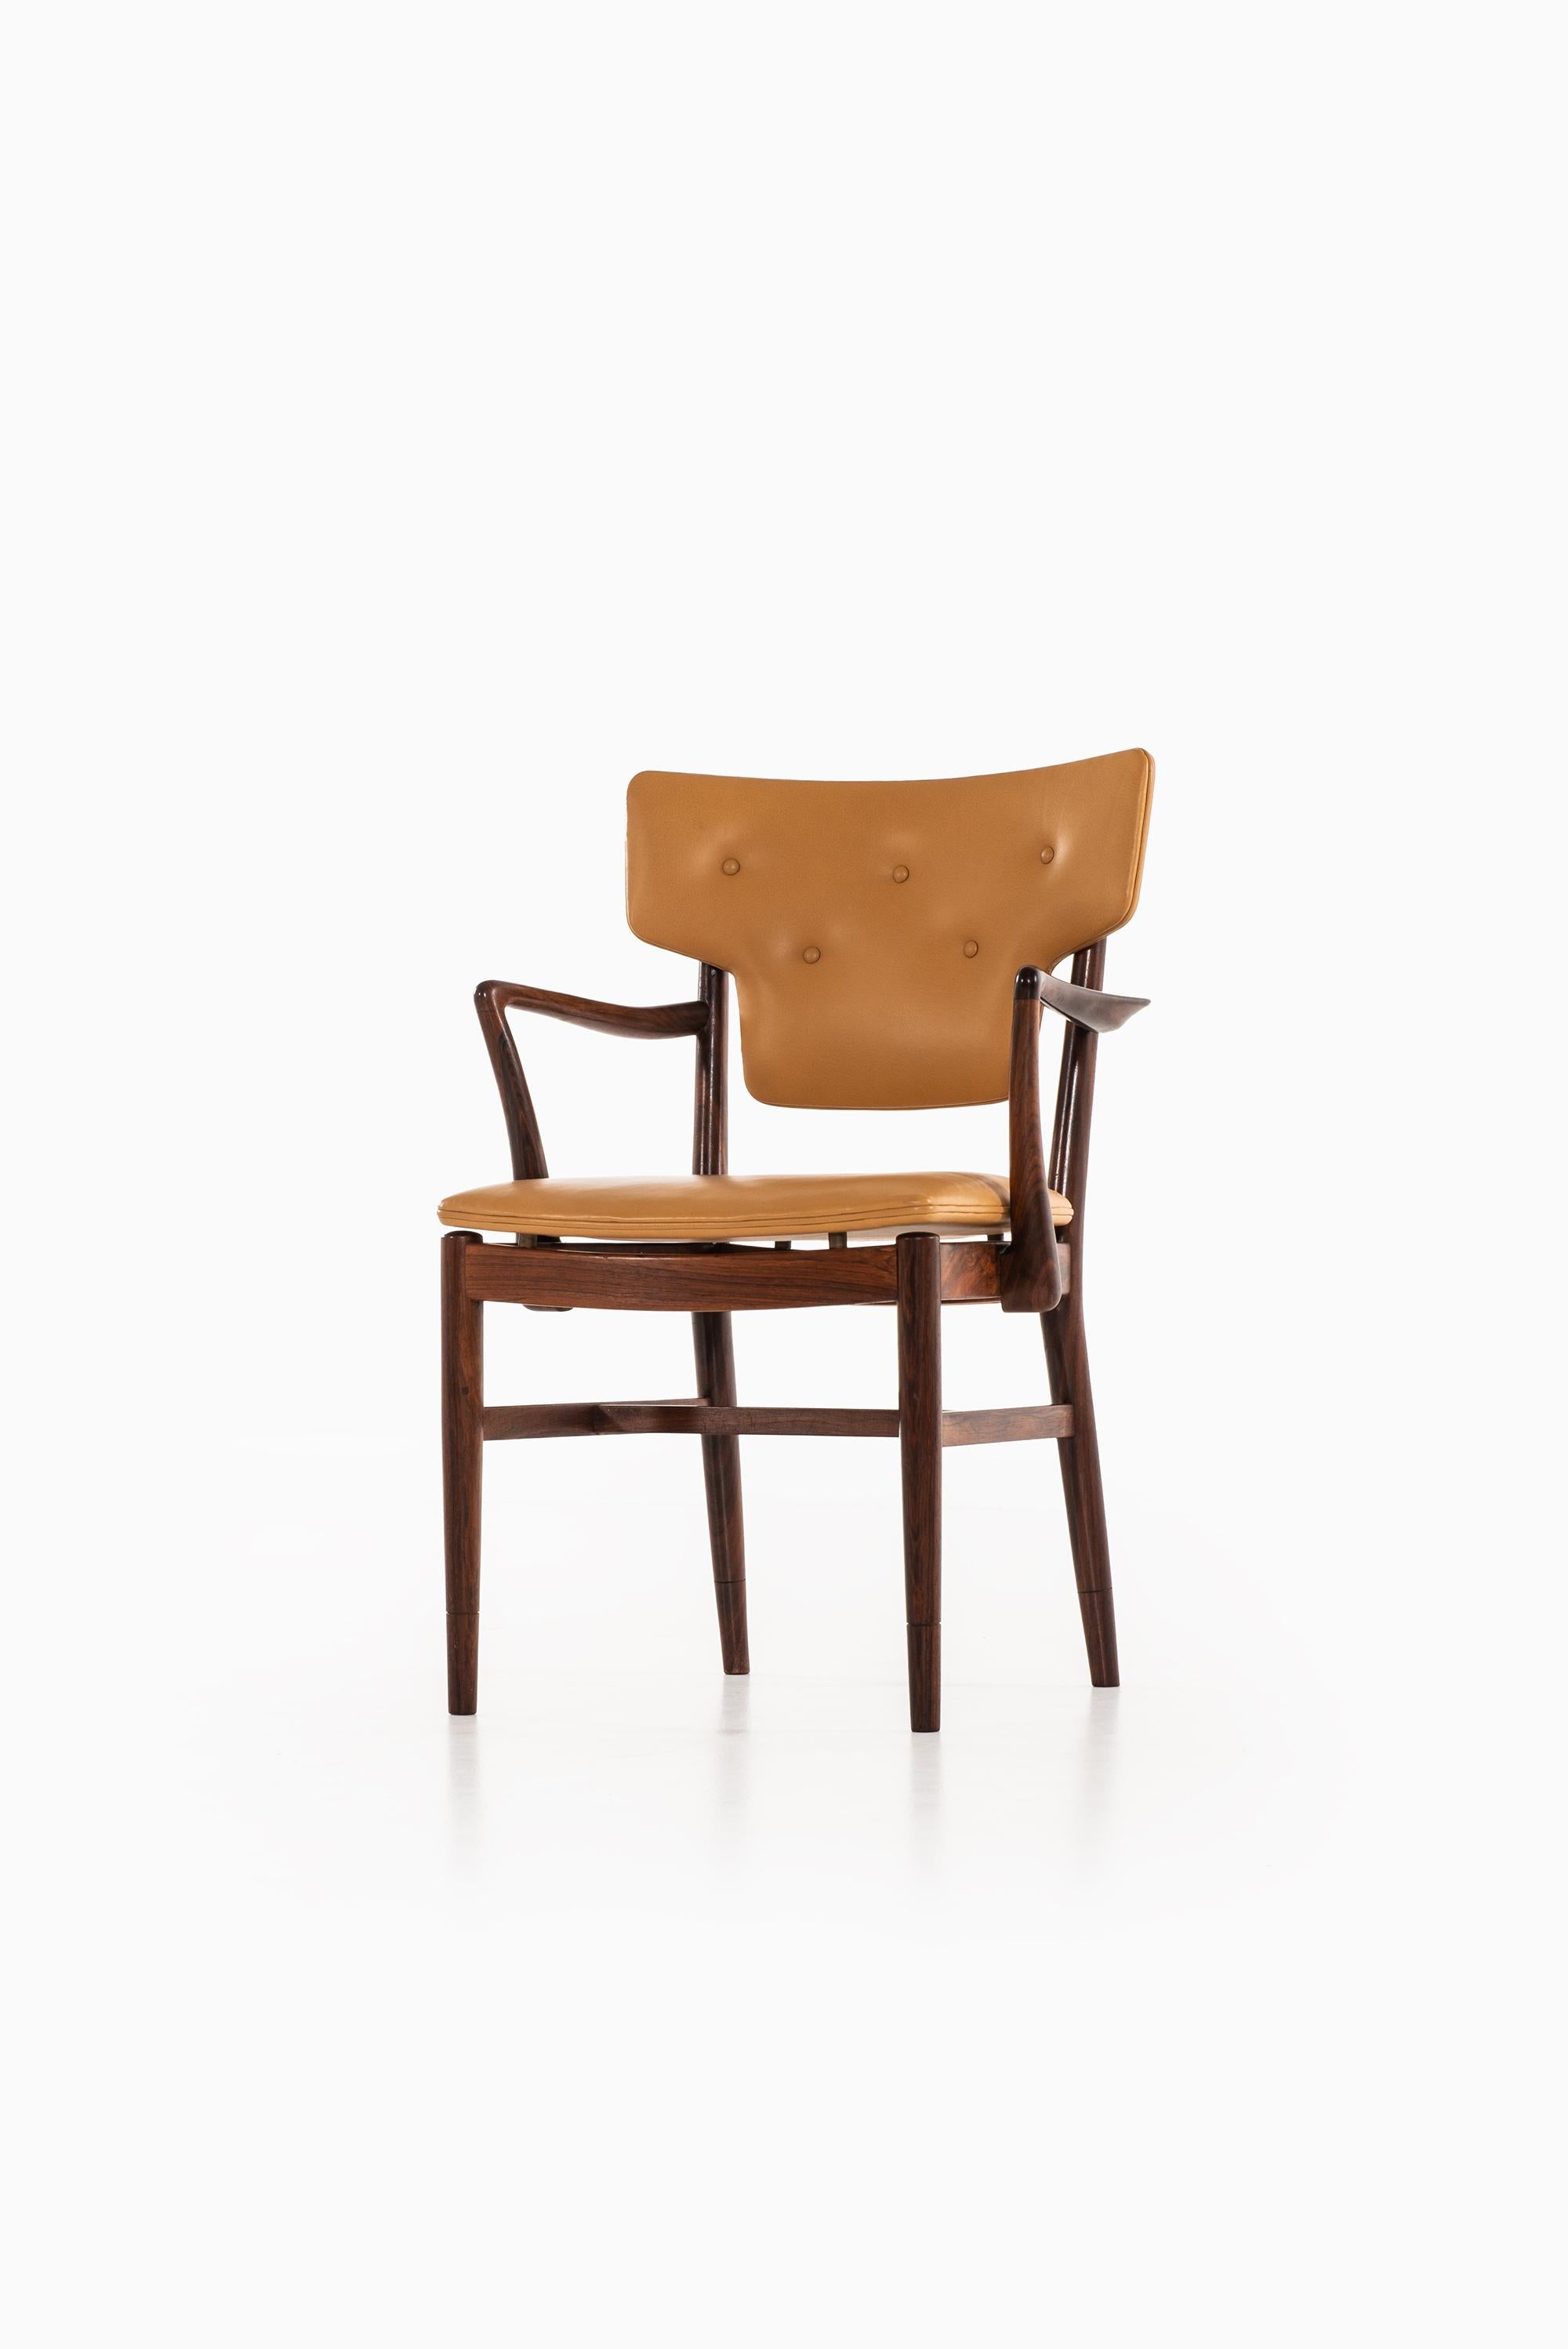 Very rare armchair attributed to Acton Bjørn & Vilhelm Lauritzen. Produced by cabinetmaker Willy beck in Denmark.